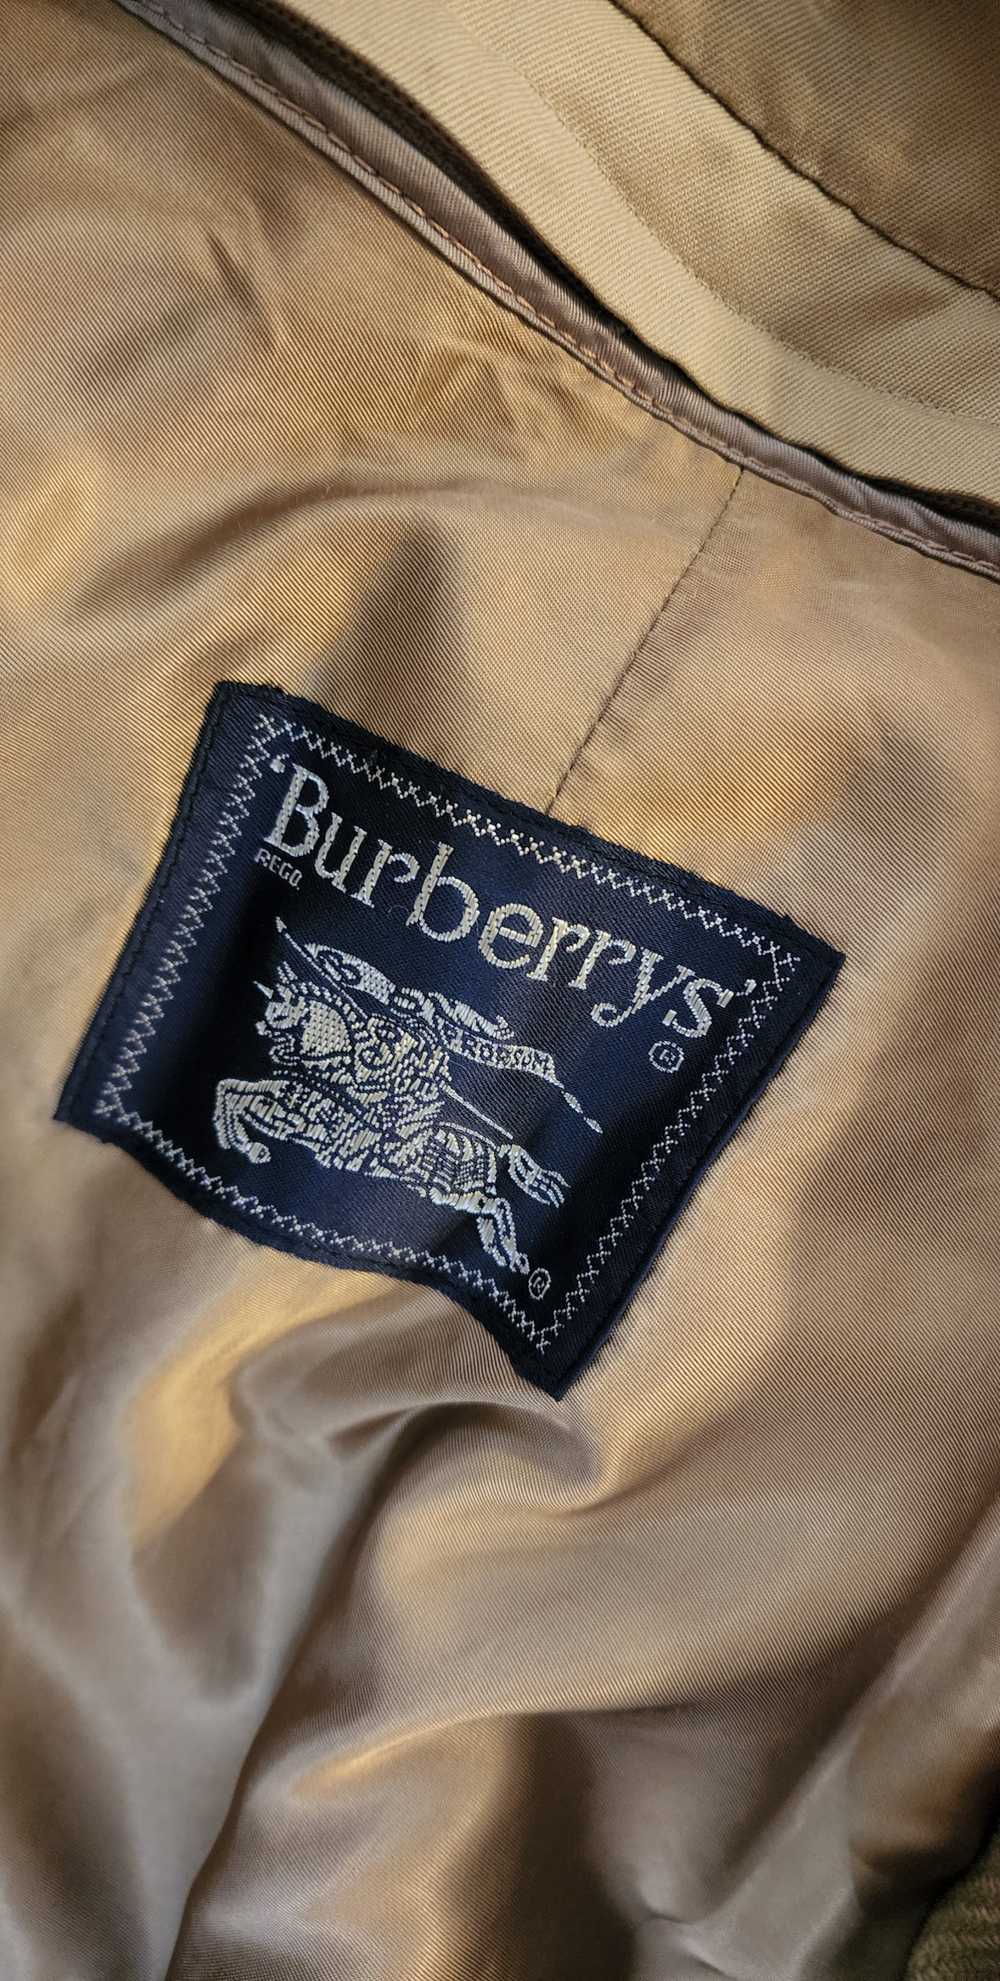 Burberry Burberry Trench Coat - image 4